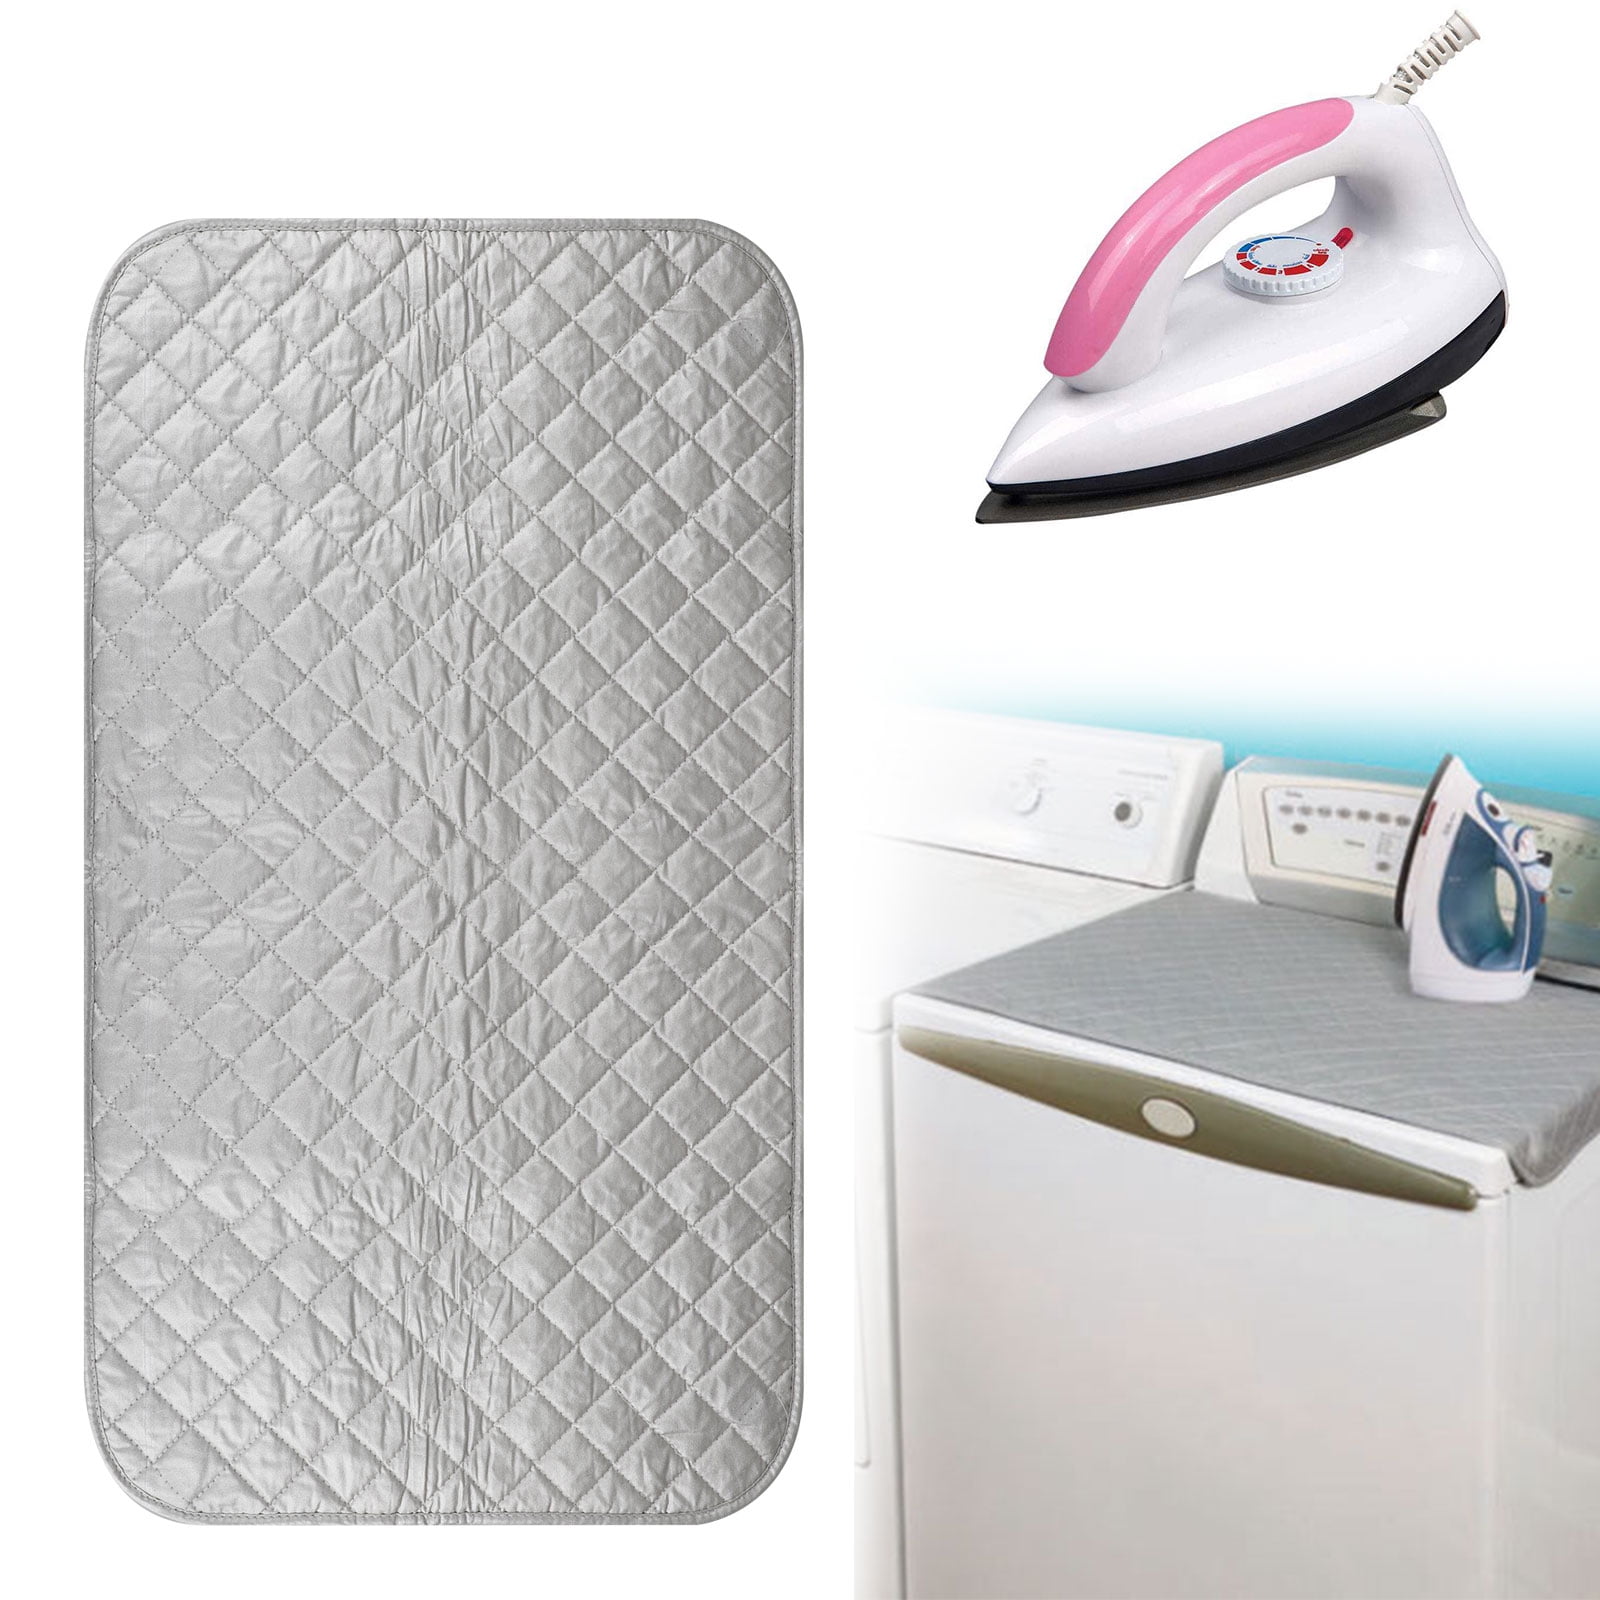 Suaetiai Foldable Magnetic Ironing Mat, Blanket Ironing Board Replacement,  Ironing Board Alternative Cover, Quilted Washer Dryer Heat Resistant Pad